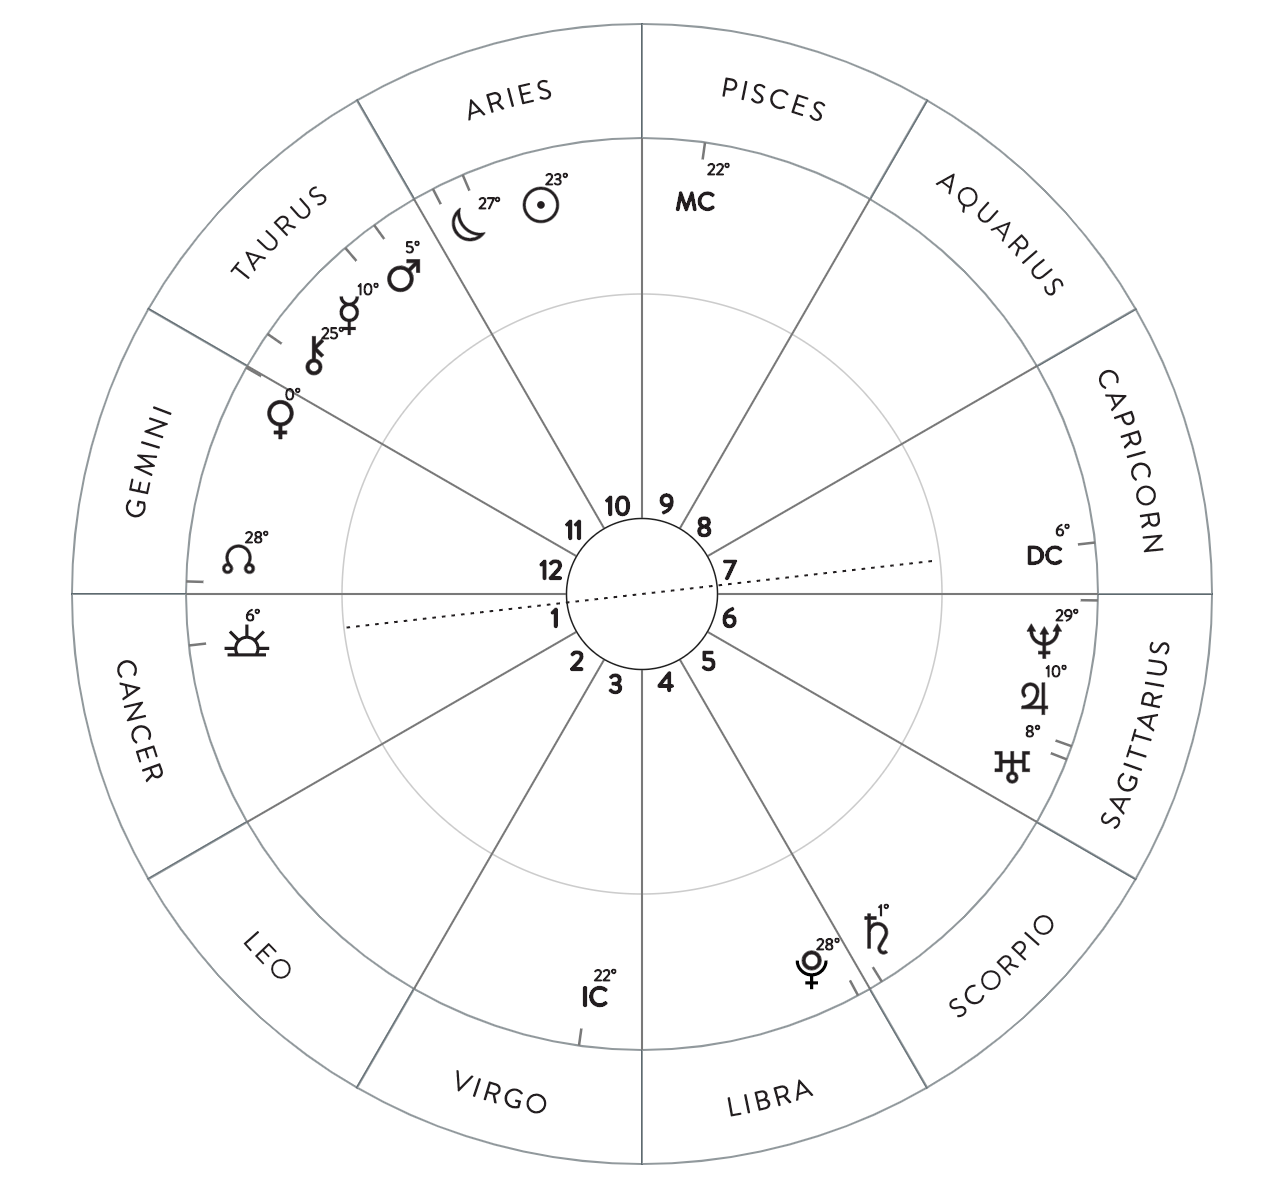 life cycles in my natal chart astrology